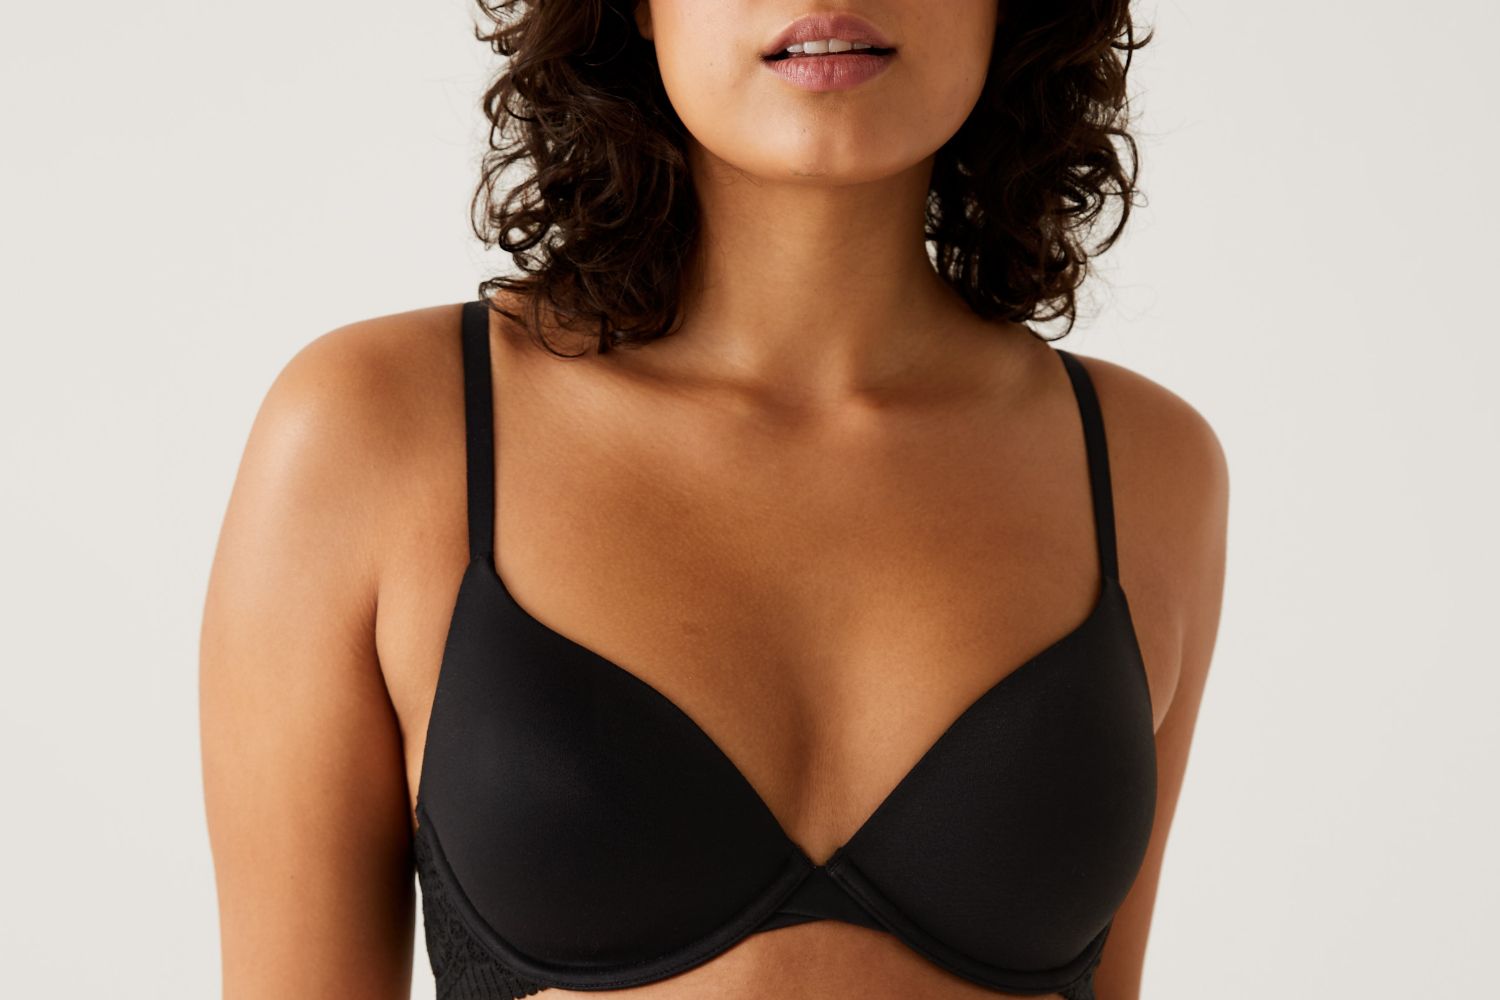 M&S Basingstoke - Love your boobs. Know your size. Get your contactless bra  fit in the lingerie department from Monday in your local M&S Basingstoke  today.   #mandsreopening #mandslocal